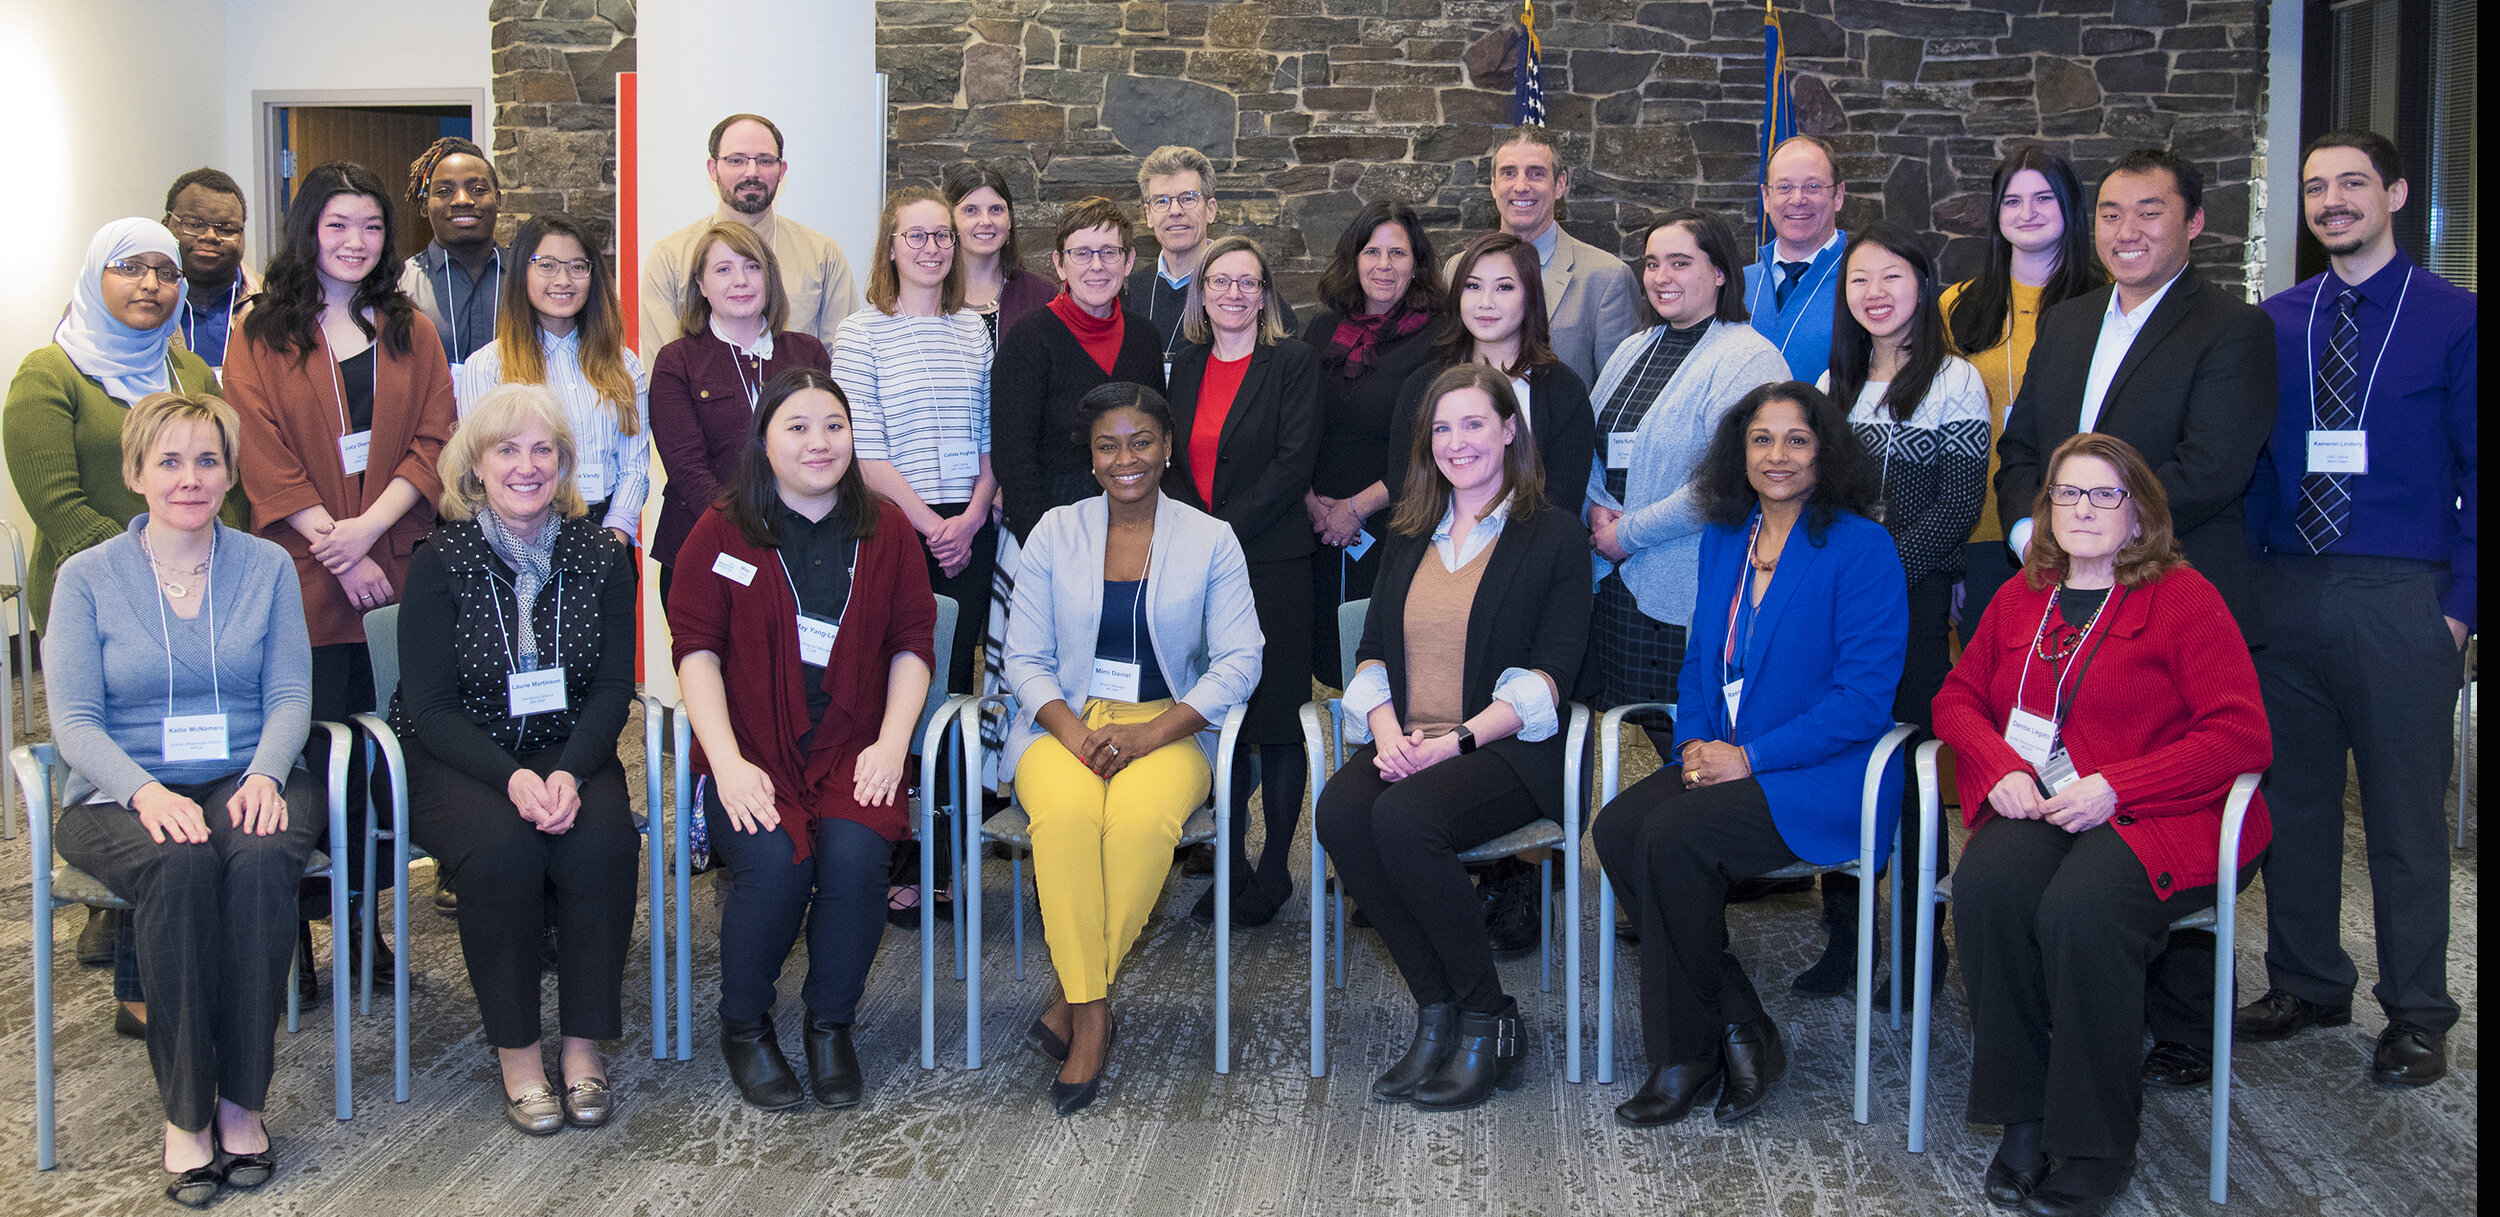 The first cohort of the Increasing Diversity in Environmental Careers (IDEC) program included 16 college students who posed during a visit with commissioners from the Minnesota Department of Natural Resources, Minnesota Pollution Control Agency, and Board of Water &amp; Soil Resources.